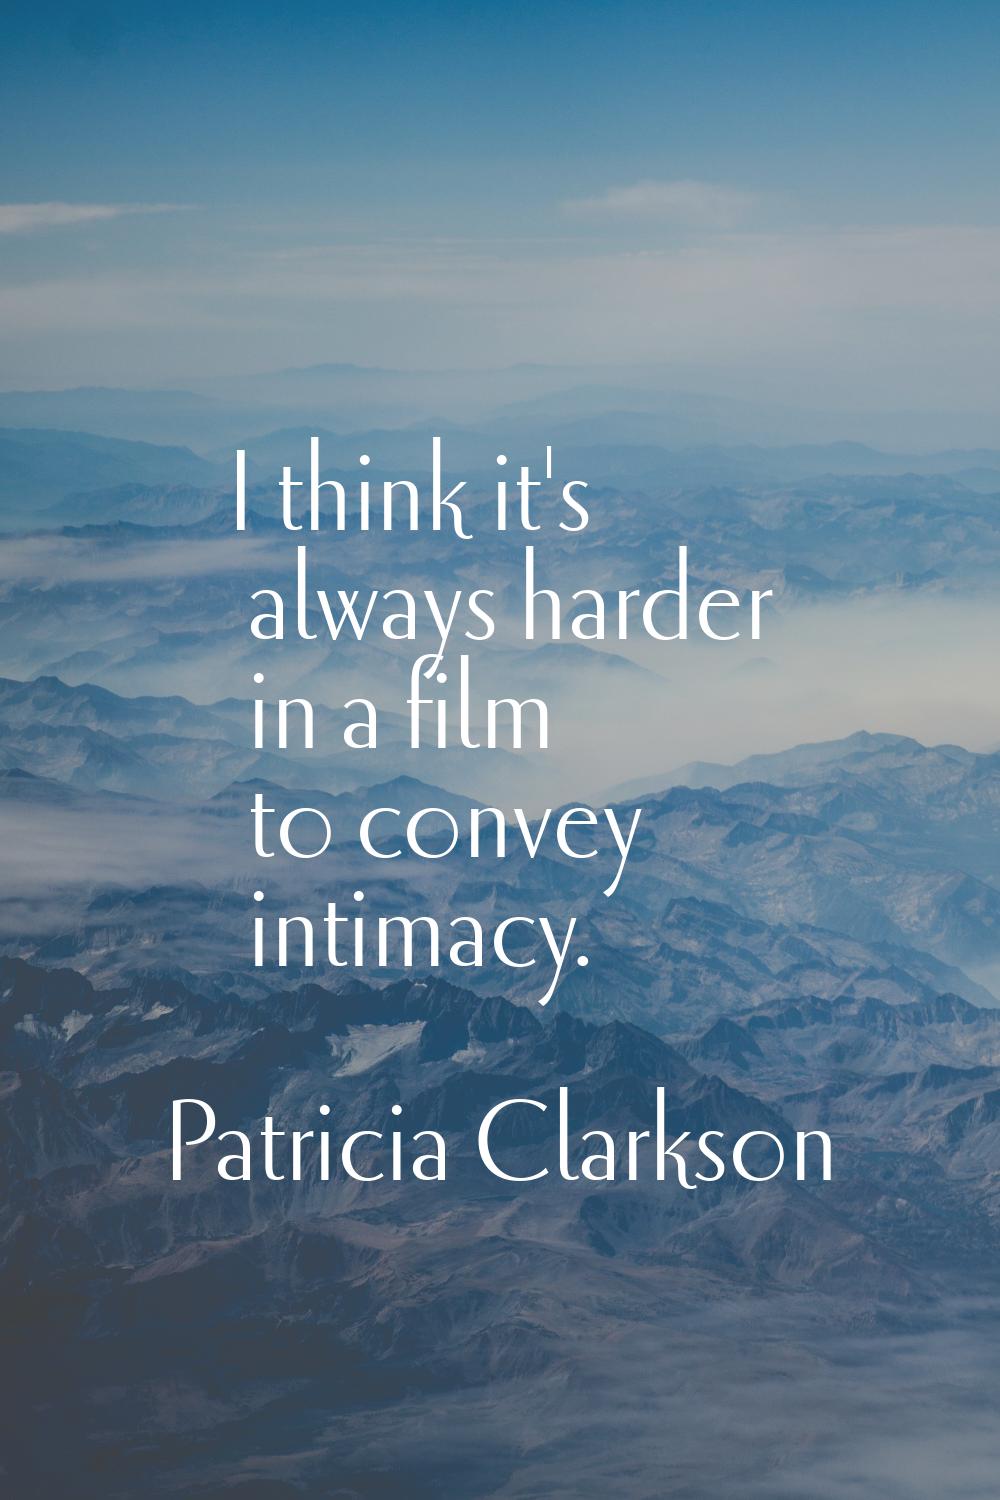 I think it's always harder in a film to convey intimacy.